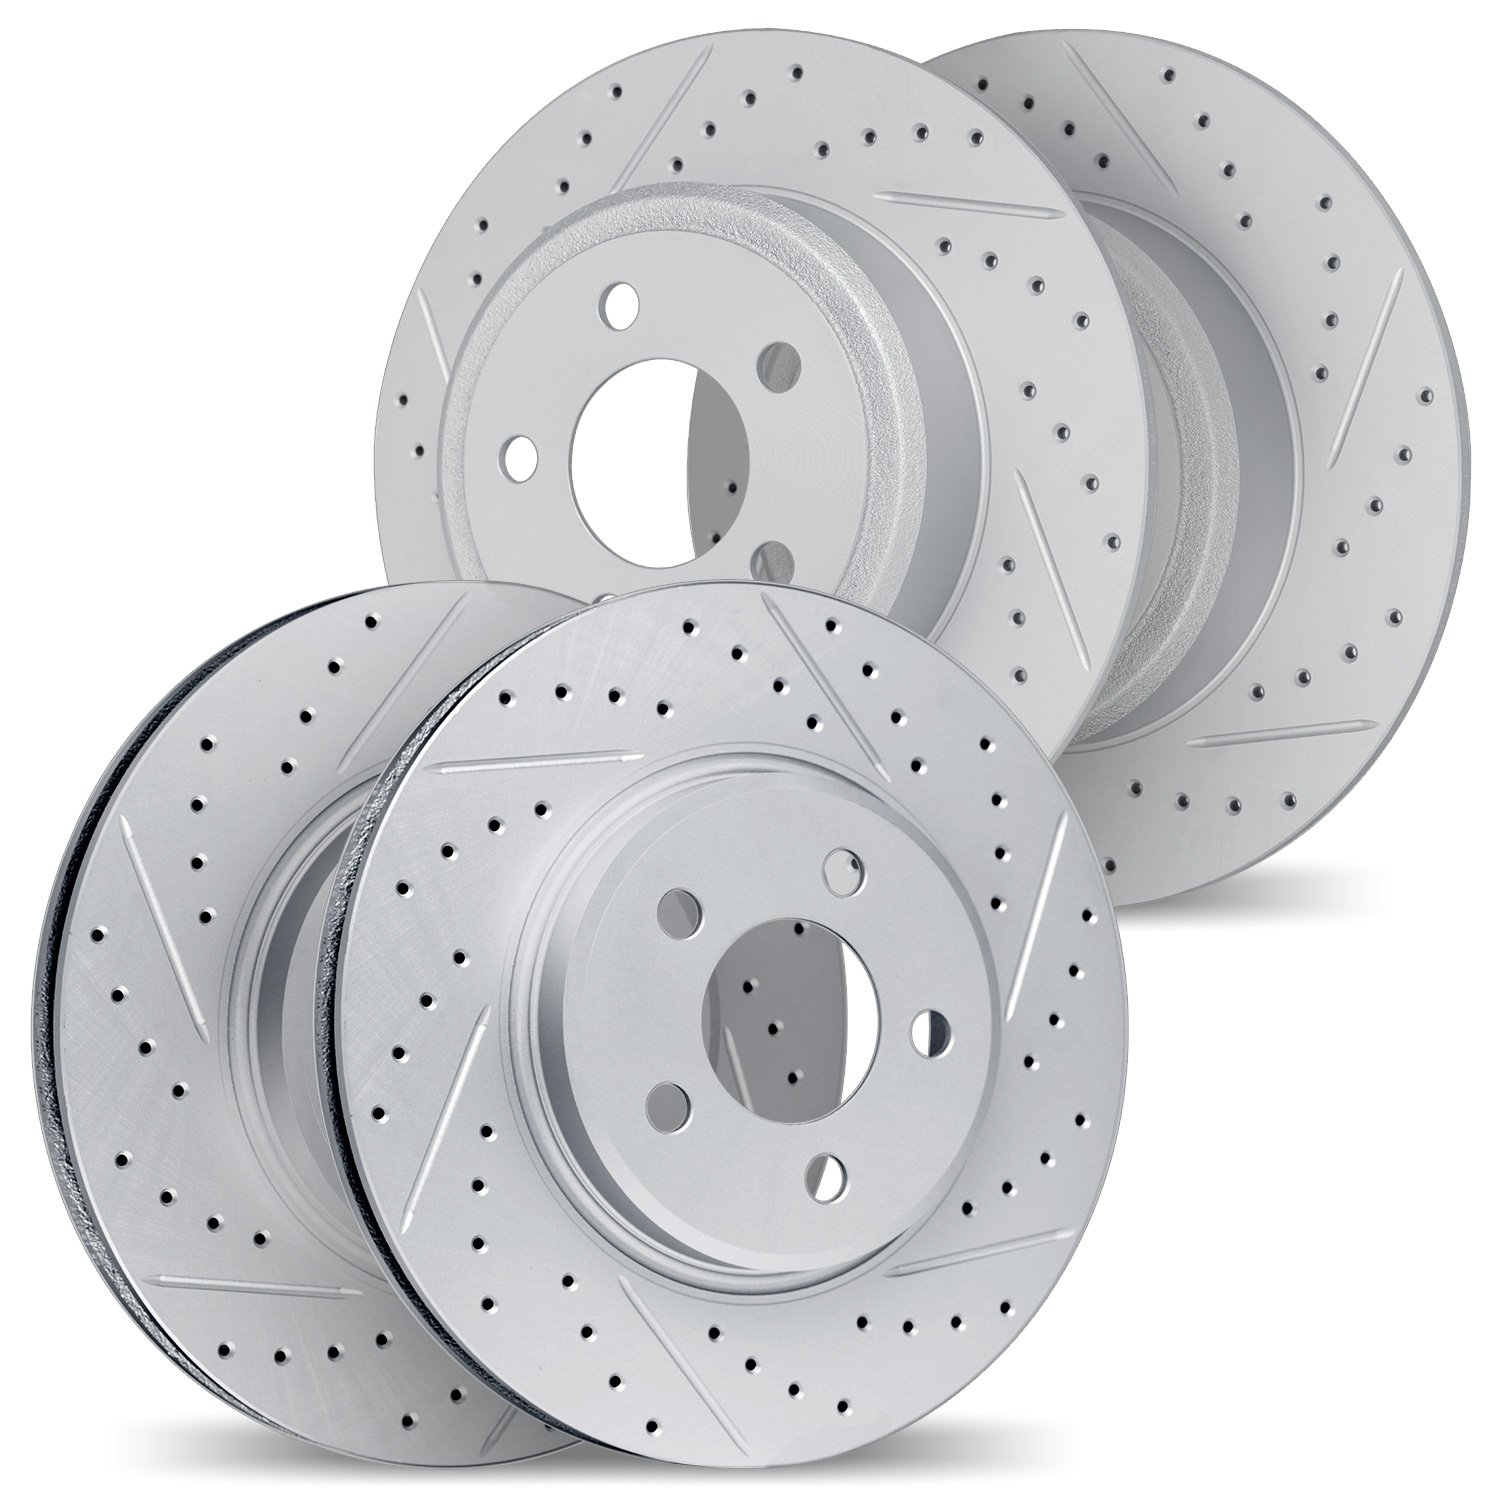 2004-76010 Geoperformance Drilled/Slotted Brake Rotors, 2006-2018 Lexus/Toyota/Scion, Position: Front and Rear